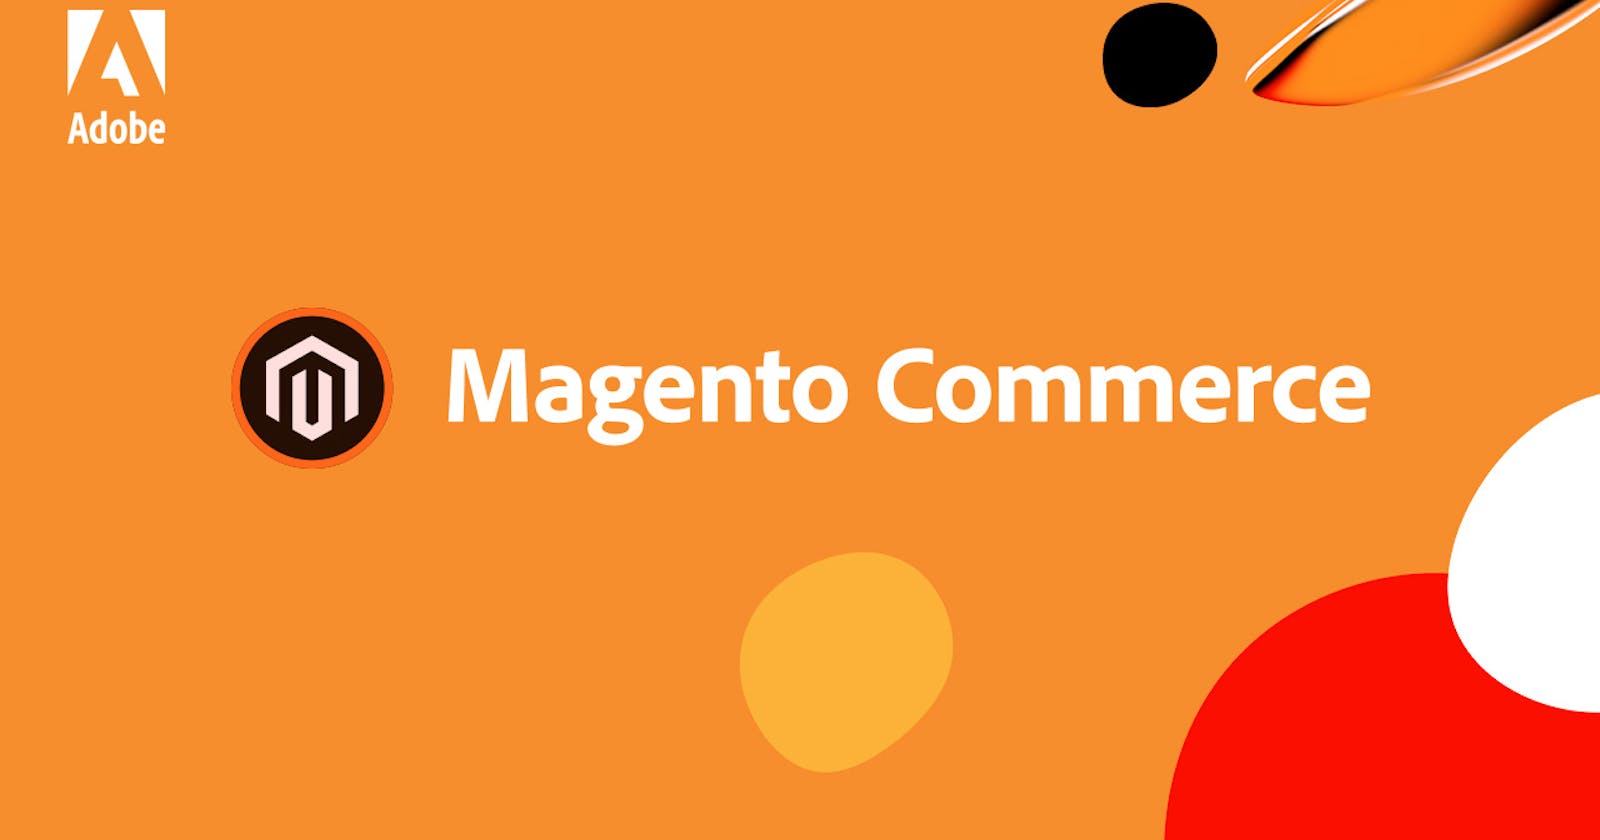 Create a frontend page in Magento 2